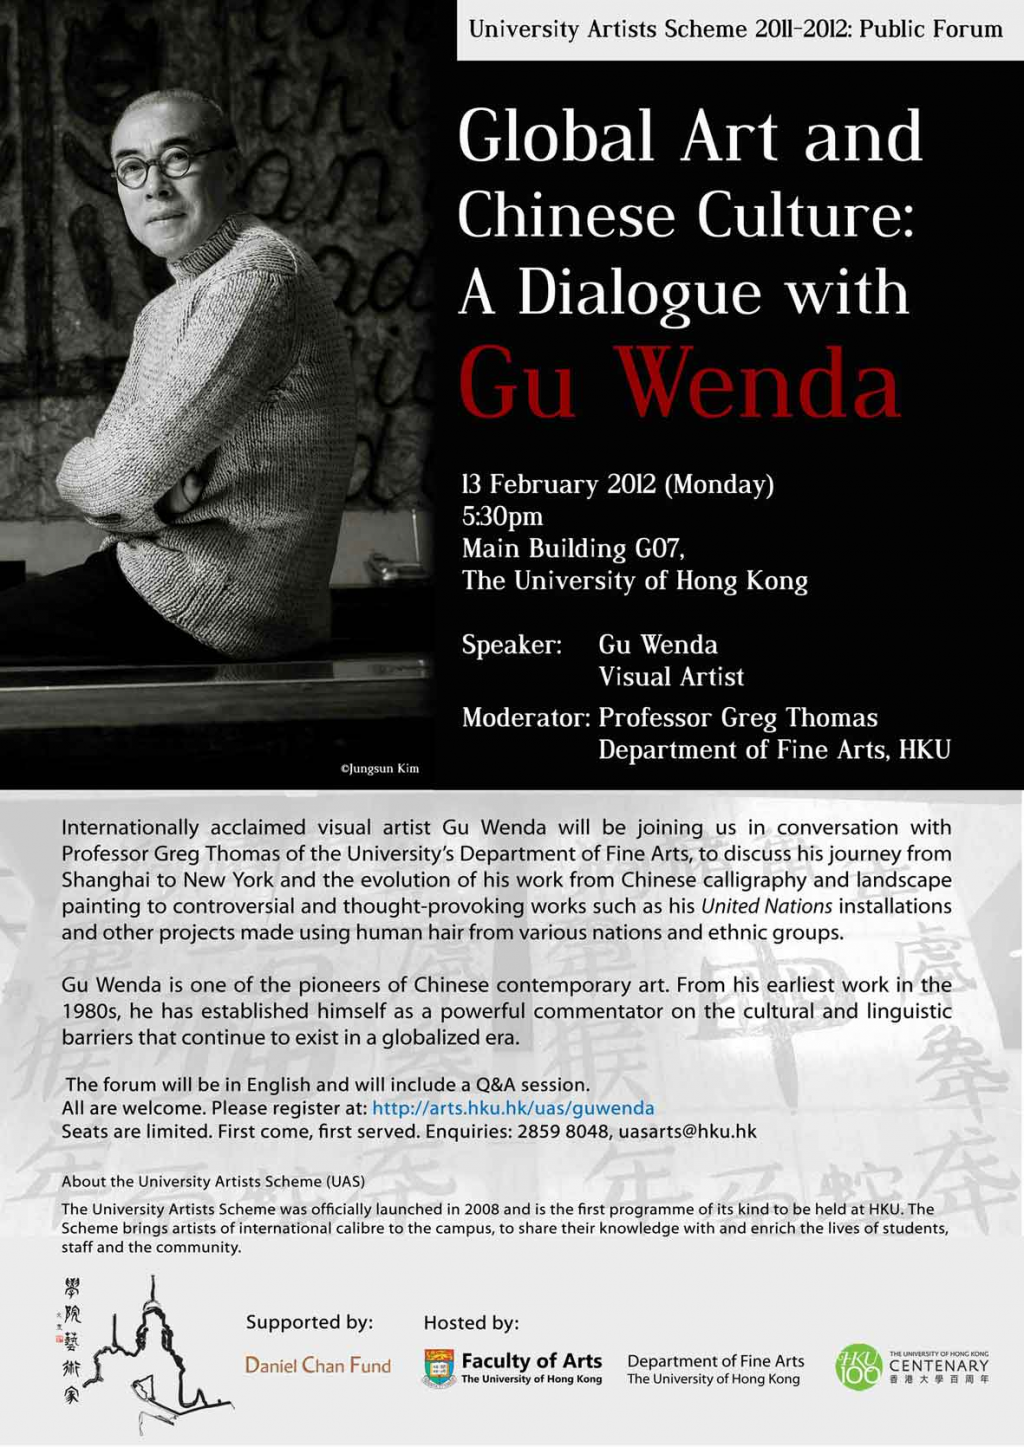 Global Art and Chinese Culture: A Dialogue with Gu Wenda